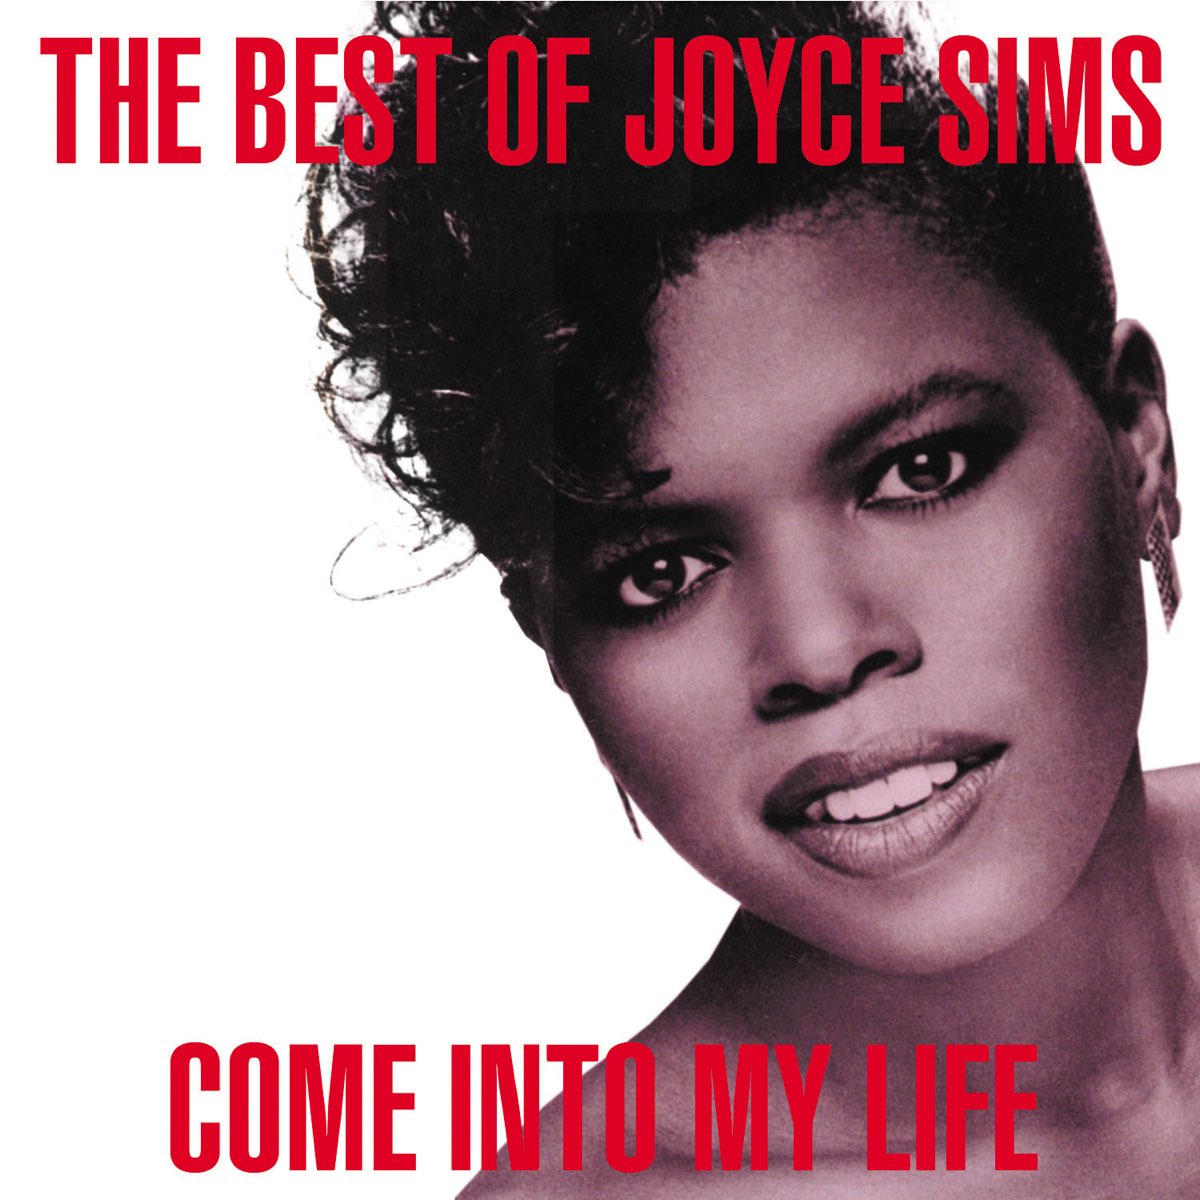 Come Into My Life - The Very Best of Joyce Sims - Album by Joyce Sims -  Apple Music